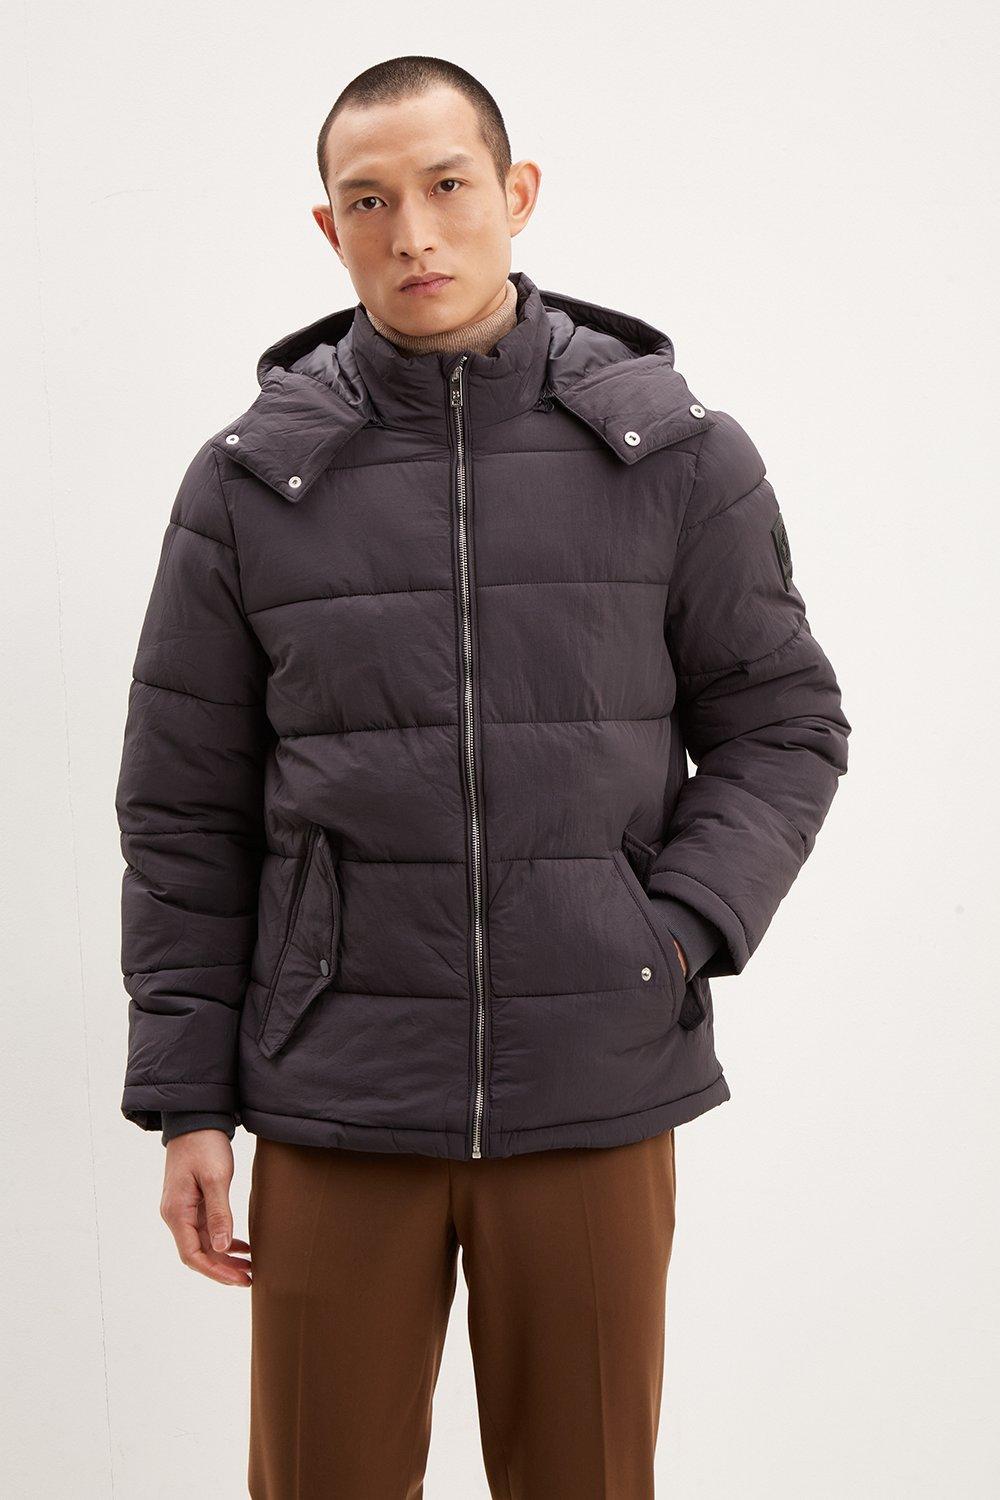 Hooded Heavyweight Crinkle Puffer Jacket - Top Cheapest Brands